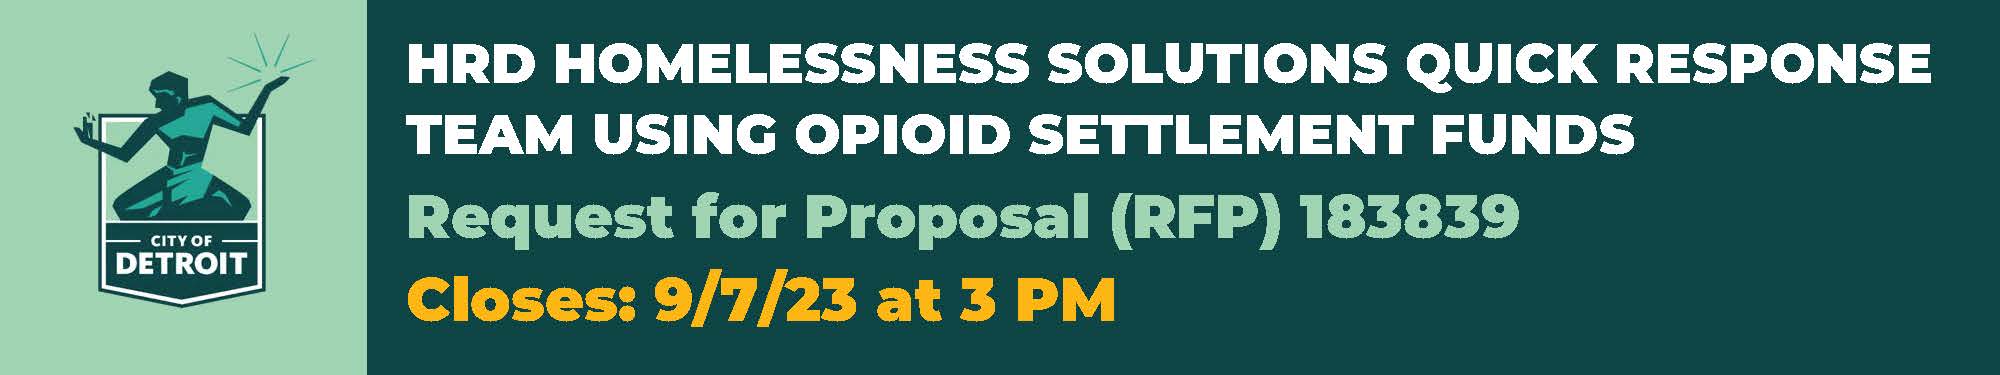 Take Part: HRD HOMELESSNESS SOLUTIONS QUICK RESPONSE TEAM USING OPIOID SETTLEMENT FUNDS